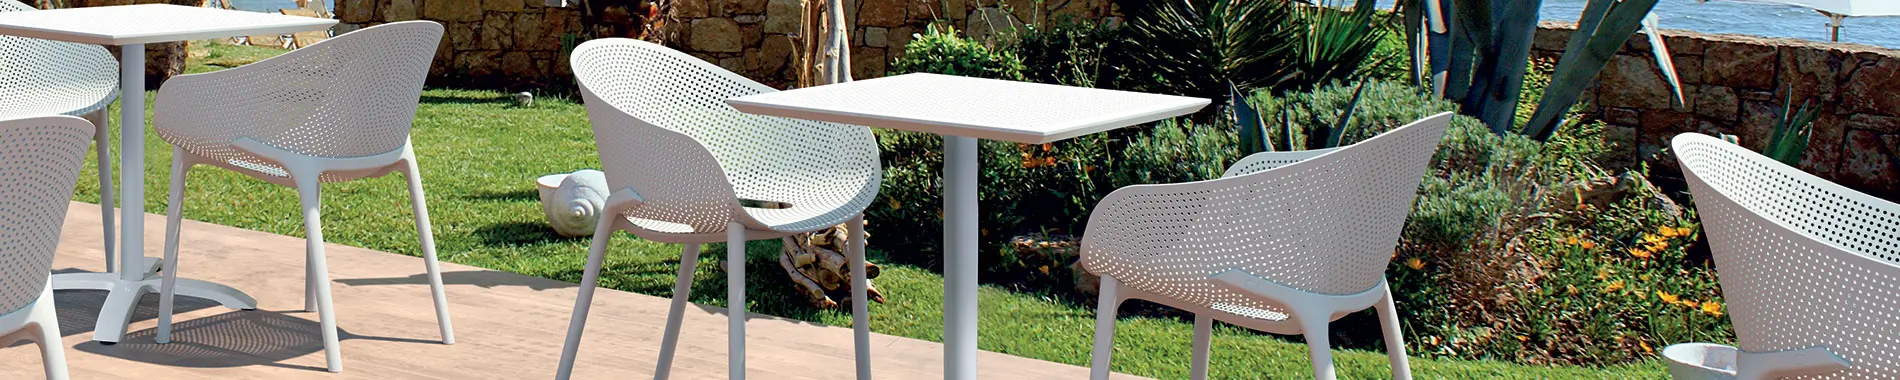 Outdoor furniture from the collection: Sunny